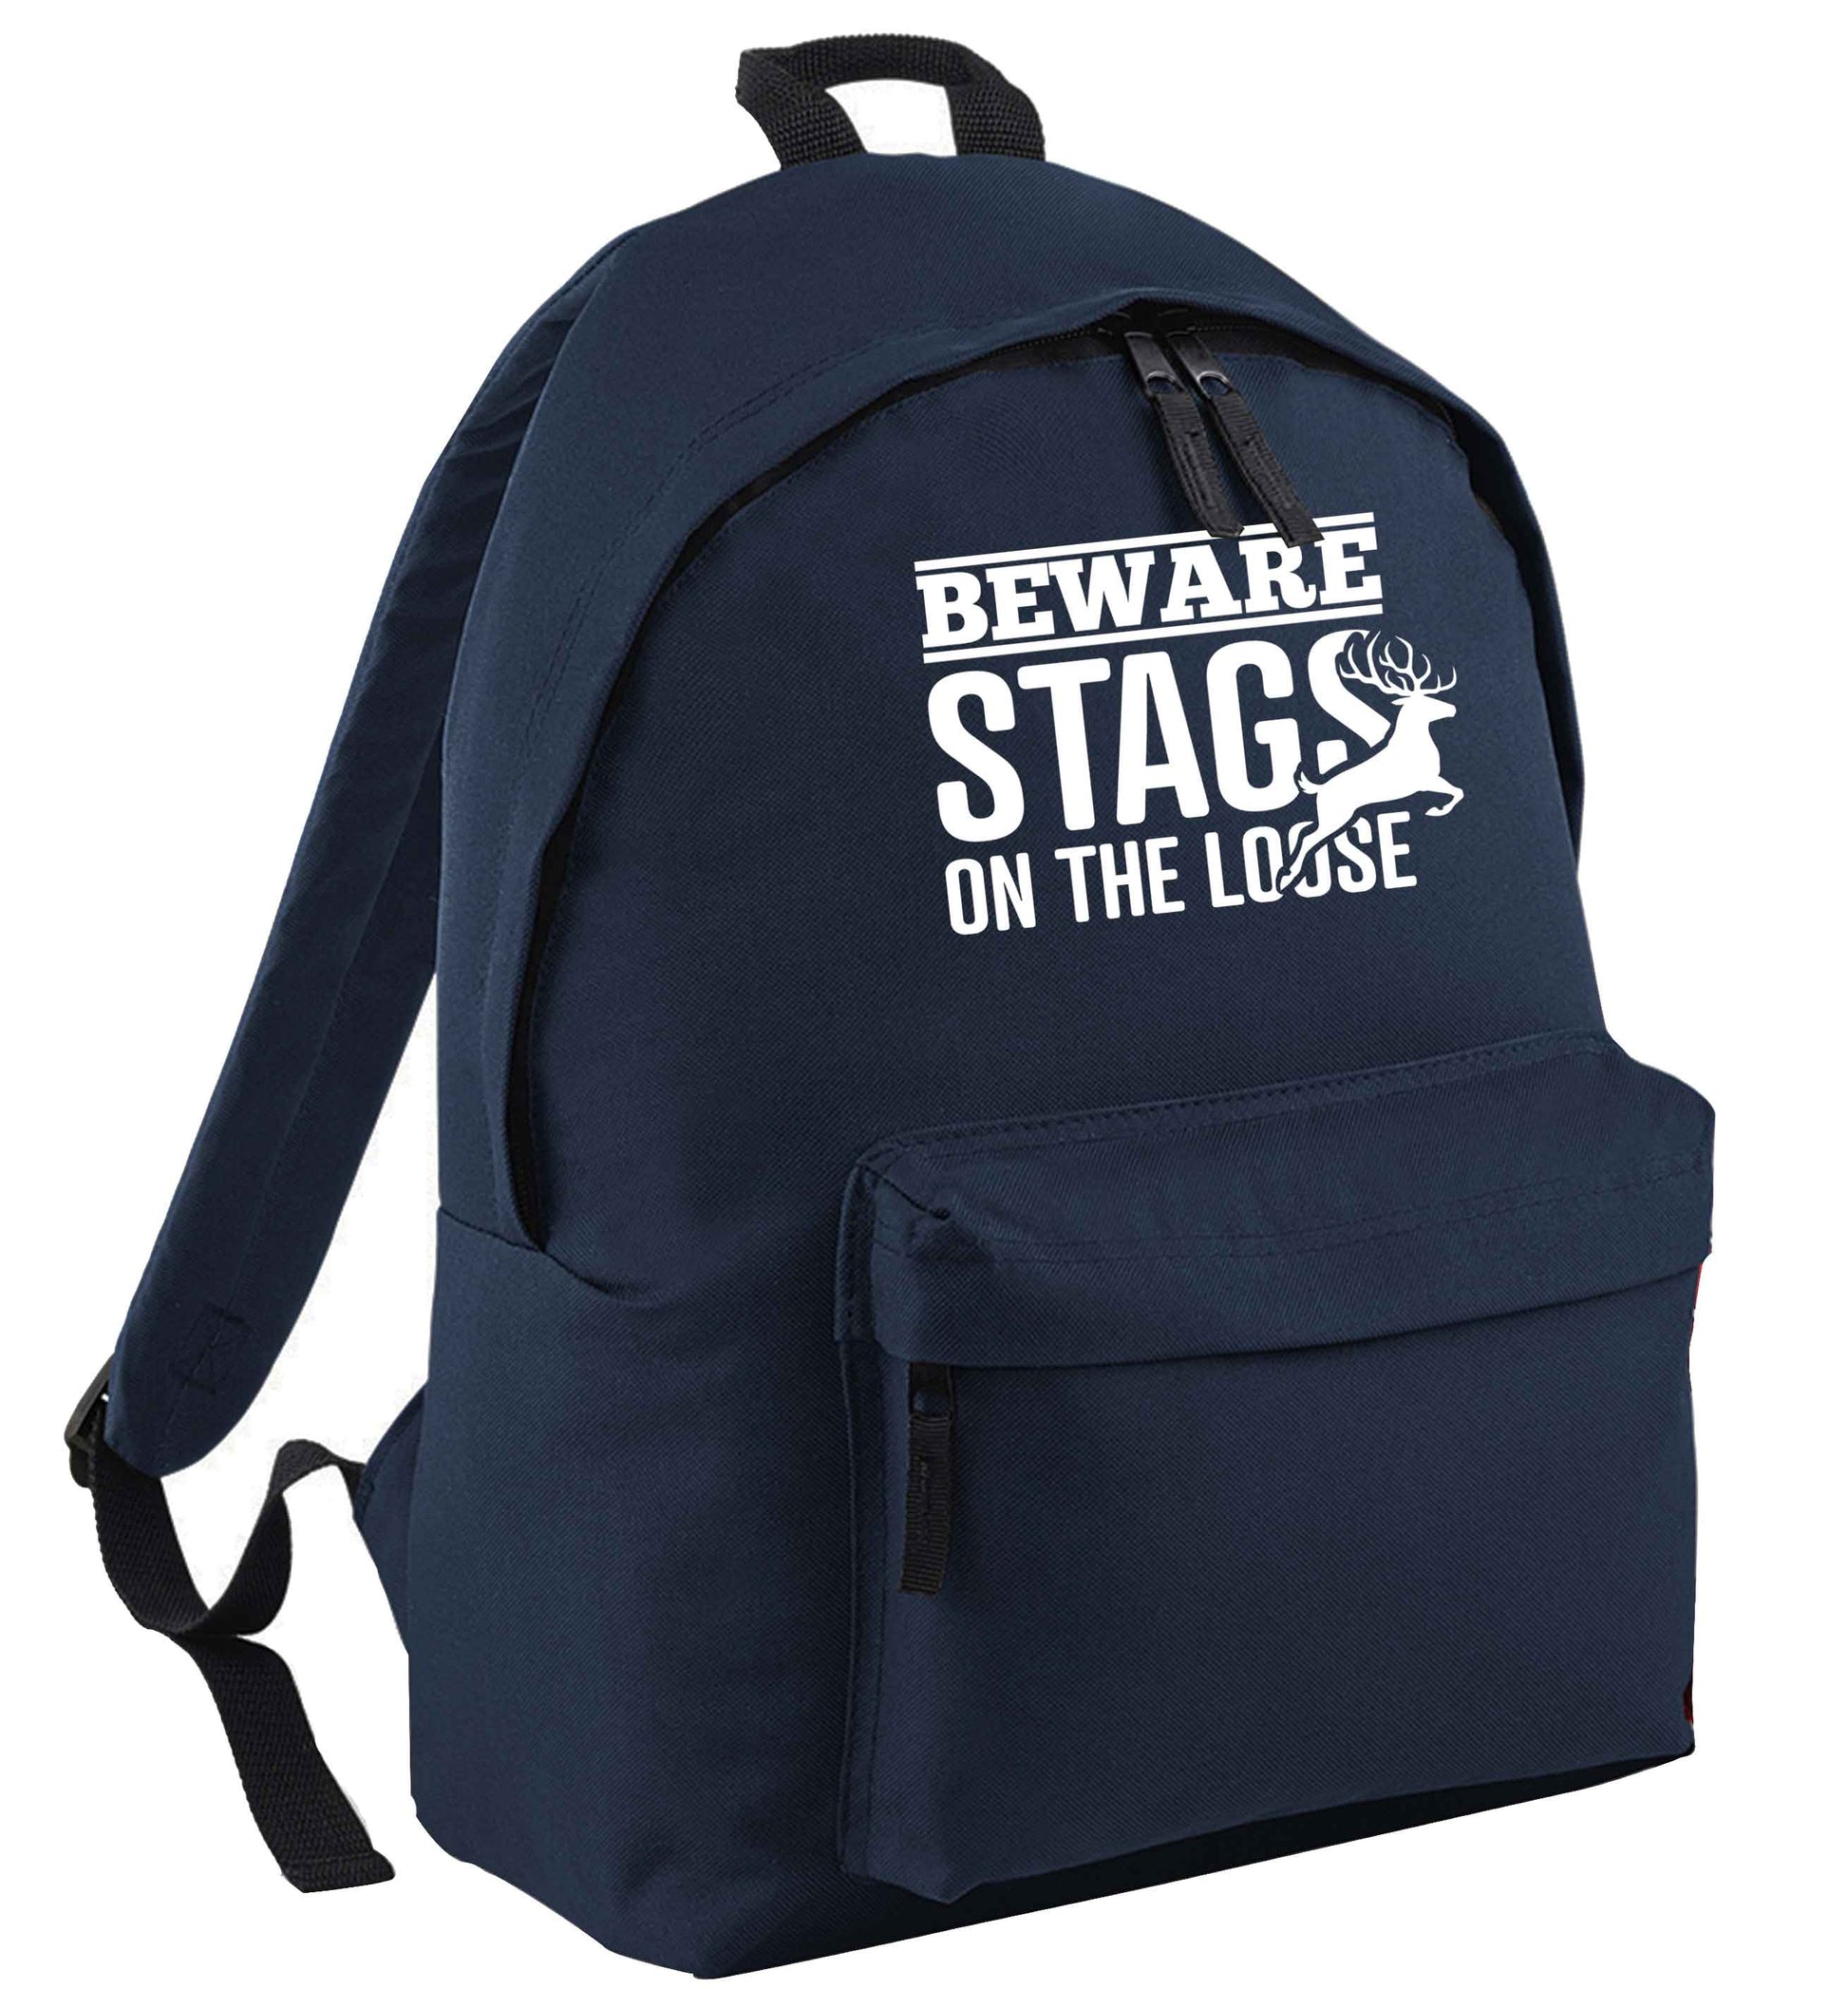 Beware stags on the loose navy adults backpack